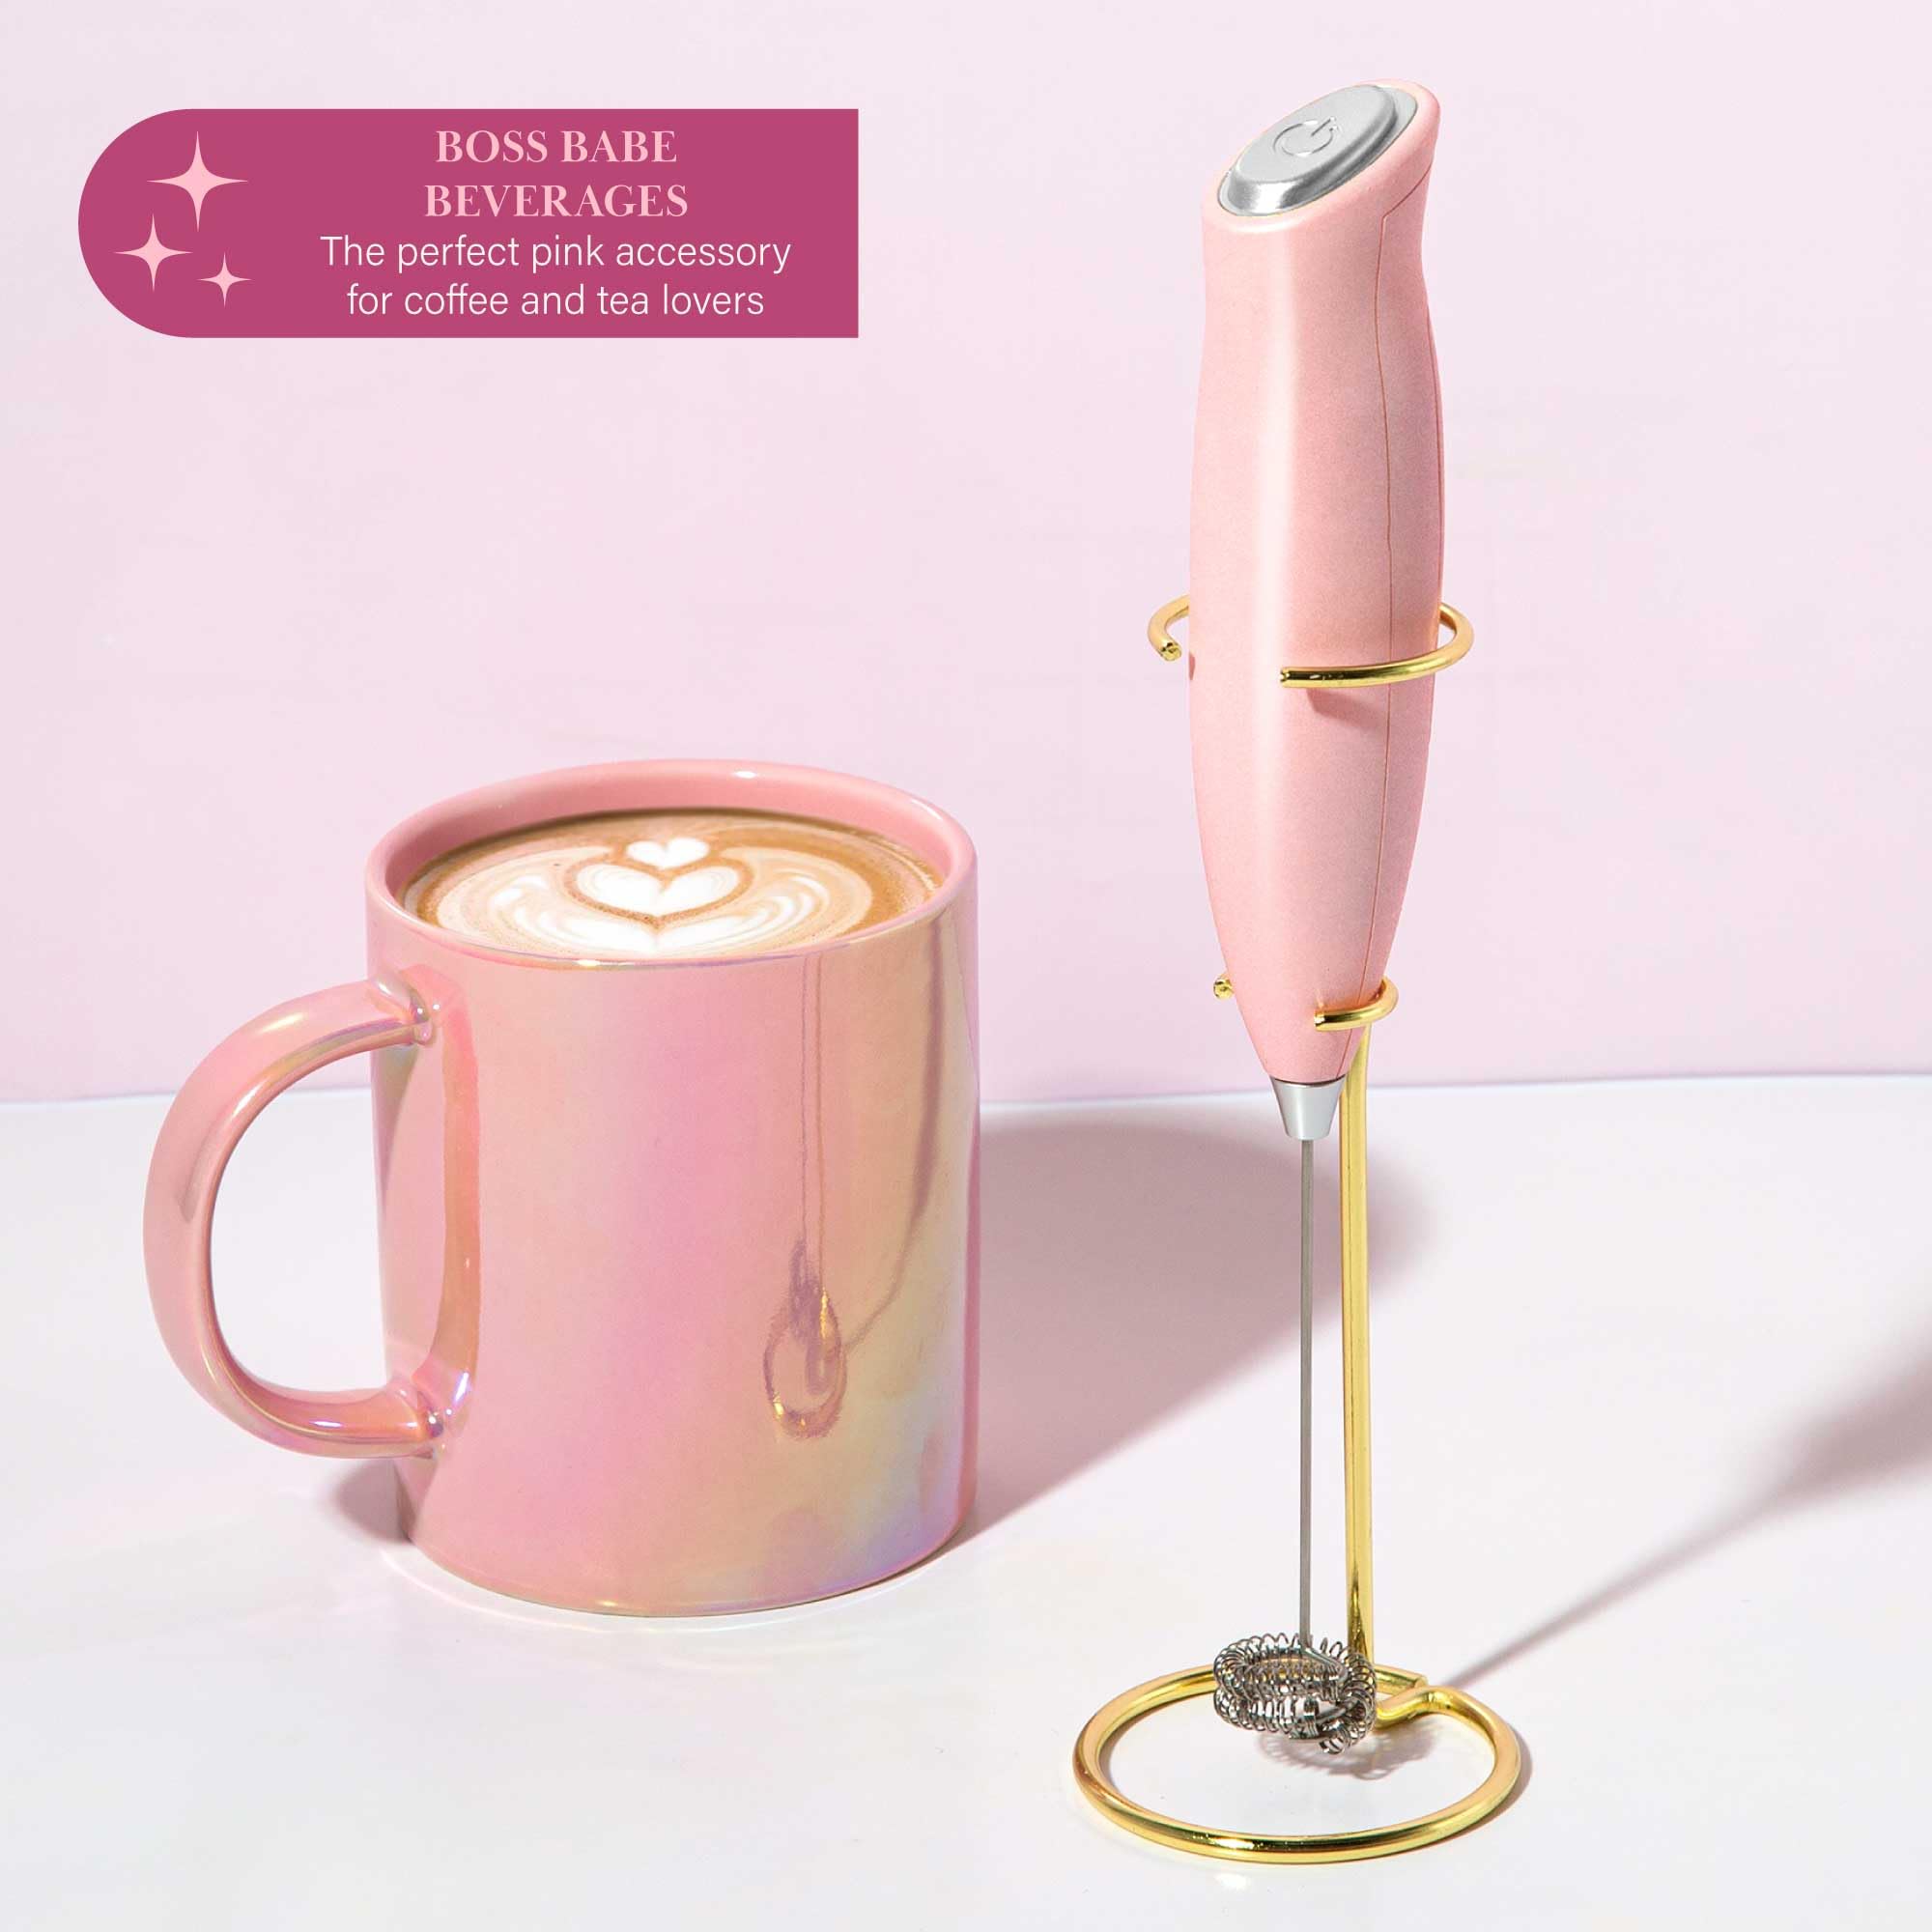 Paris Hilton Electric Handheld Milk Frother with Double Coil Head Whisk and Gold Metal Stand, Battery Powered (2 AA Batteries Required but Not Included), Pink Sparkle Finish